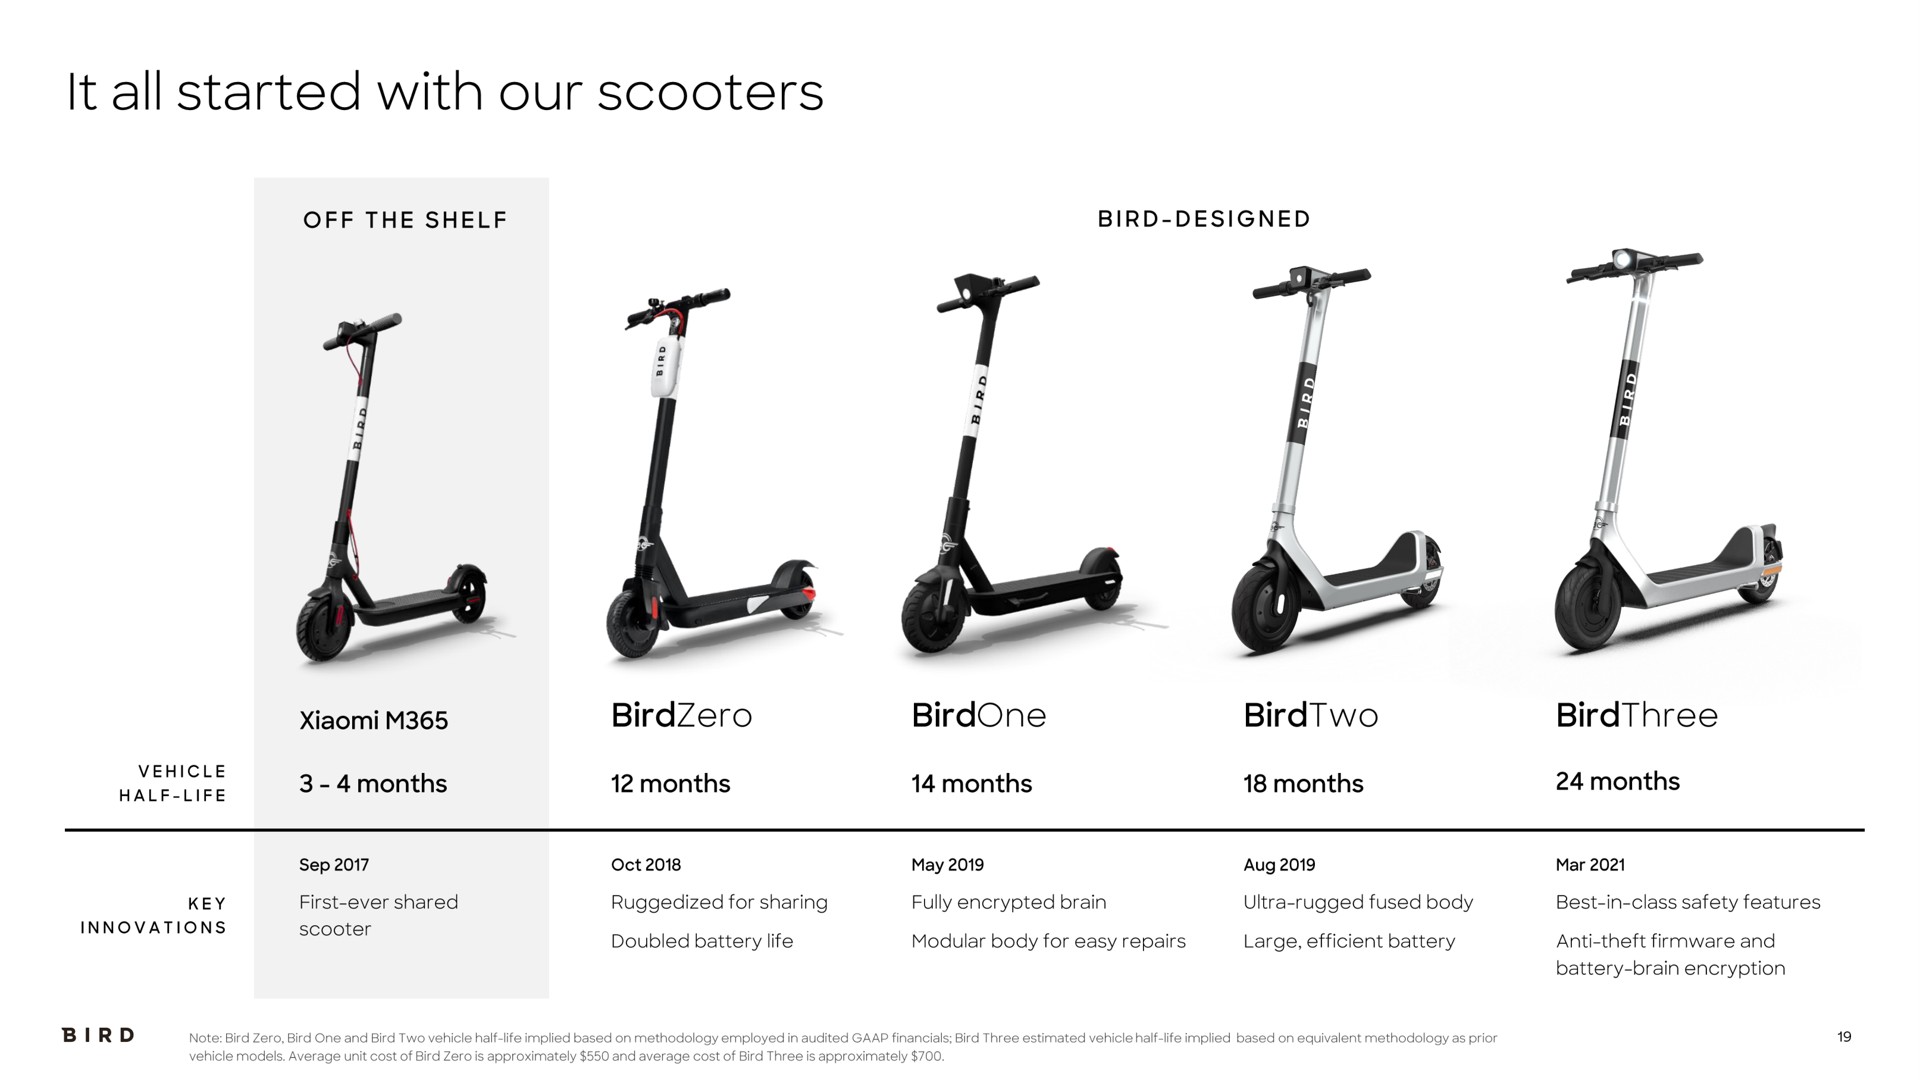 it all started with our scooters | Bird